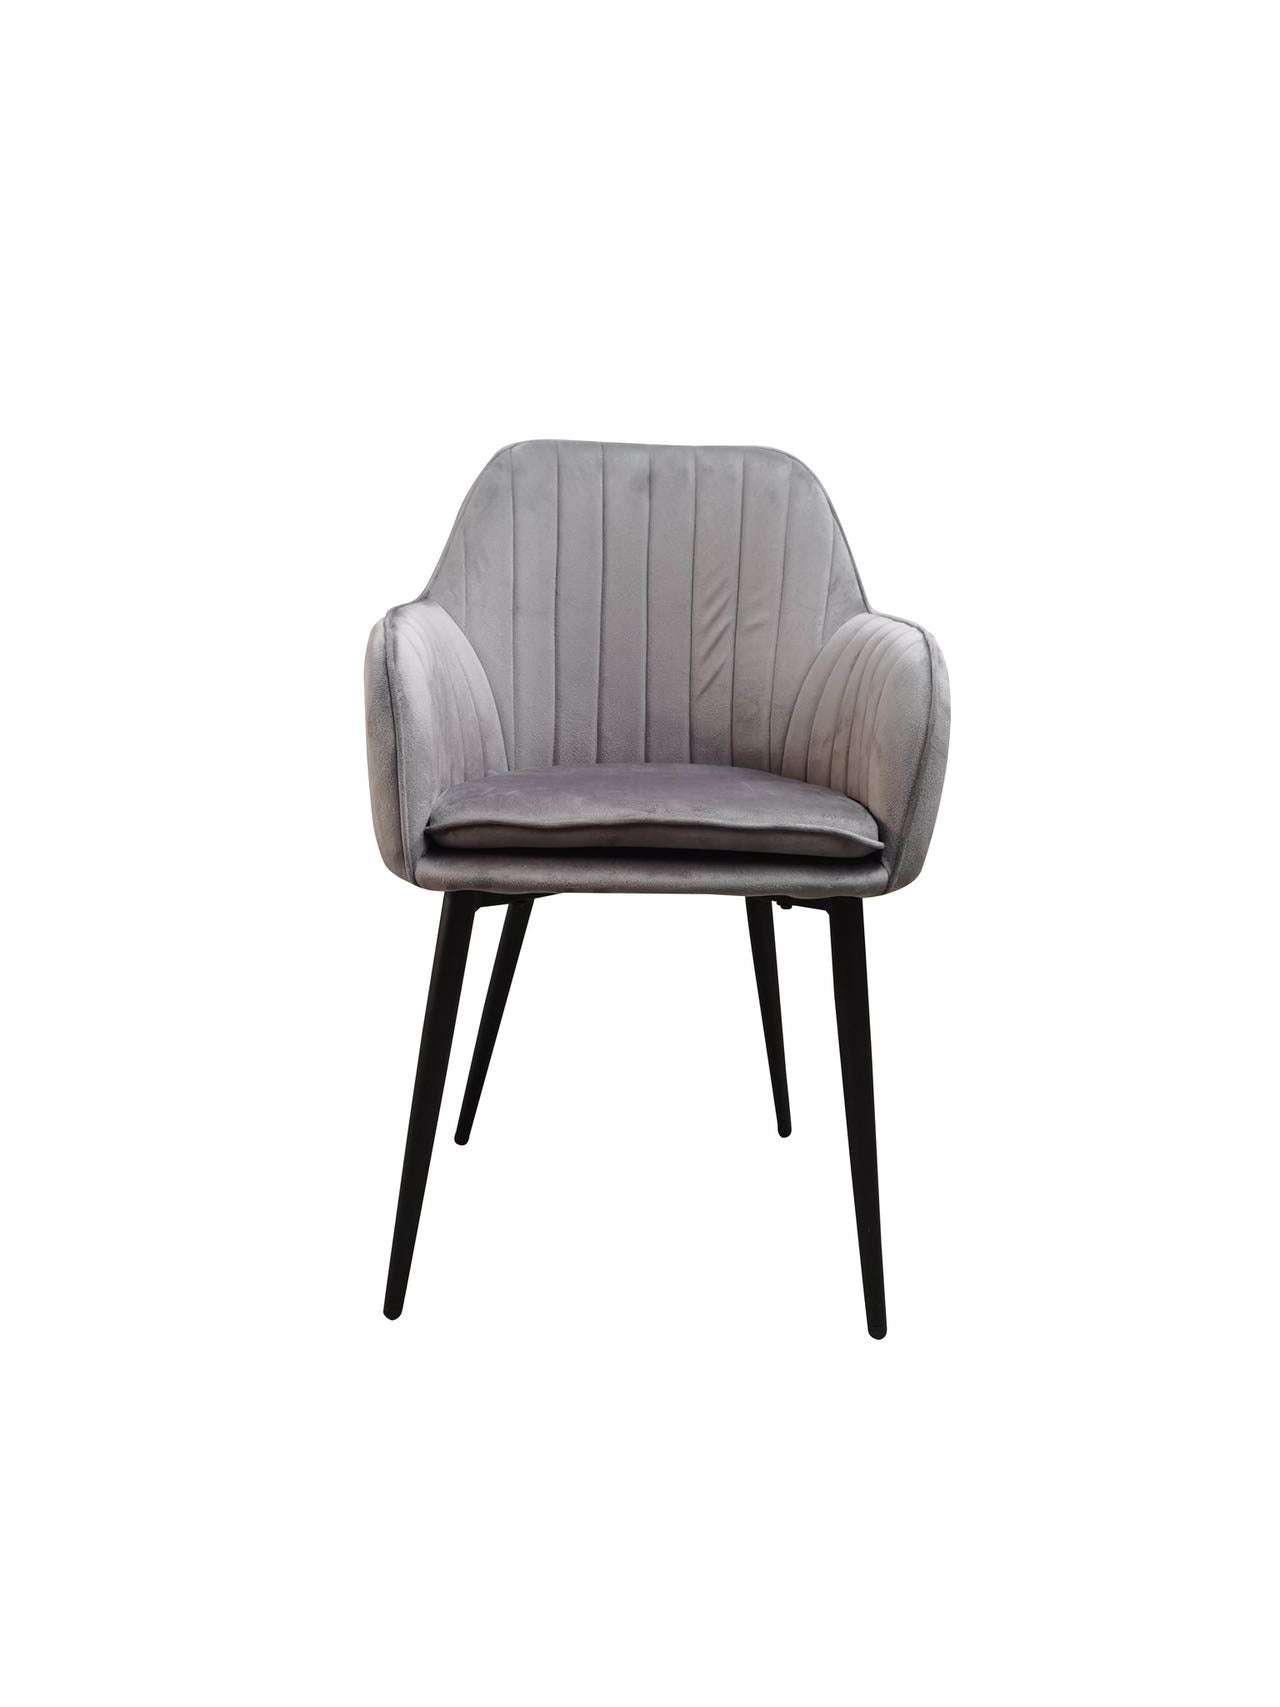 French Style Dining Chair Grey Color Velvet Upholstered With Thickened Seat Cushion Armchair